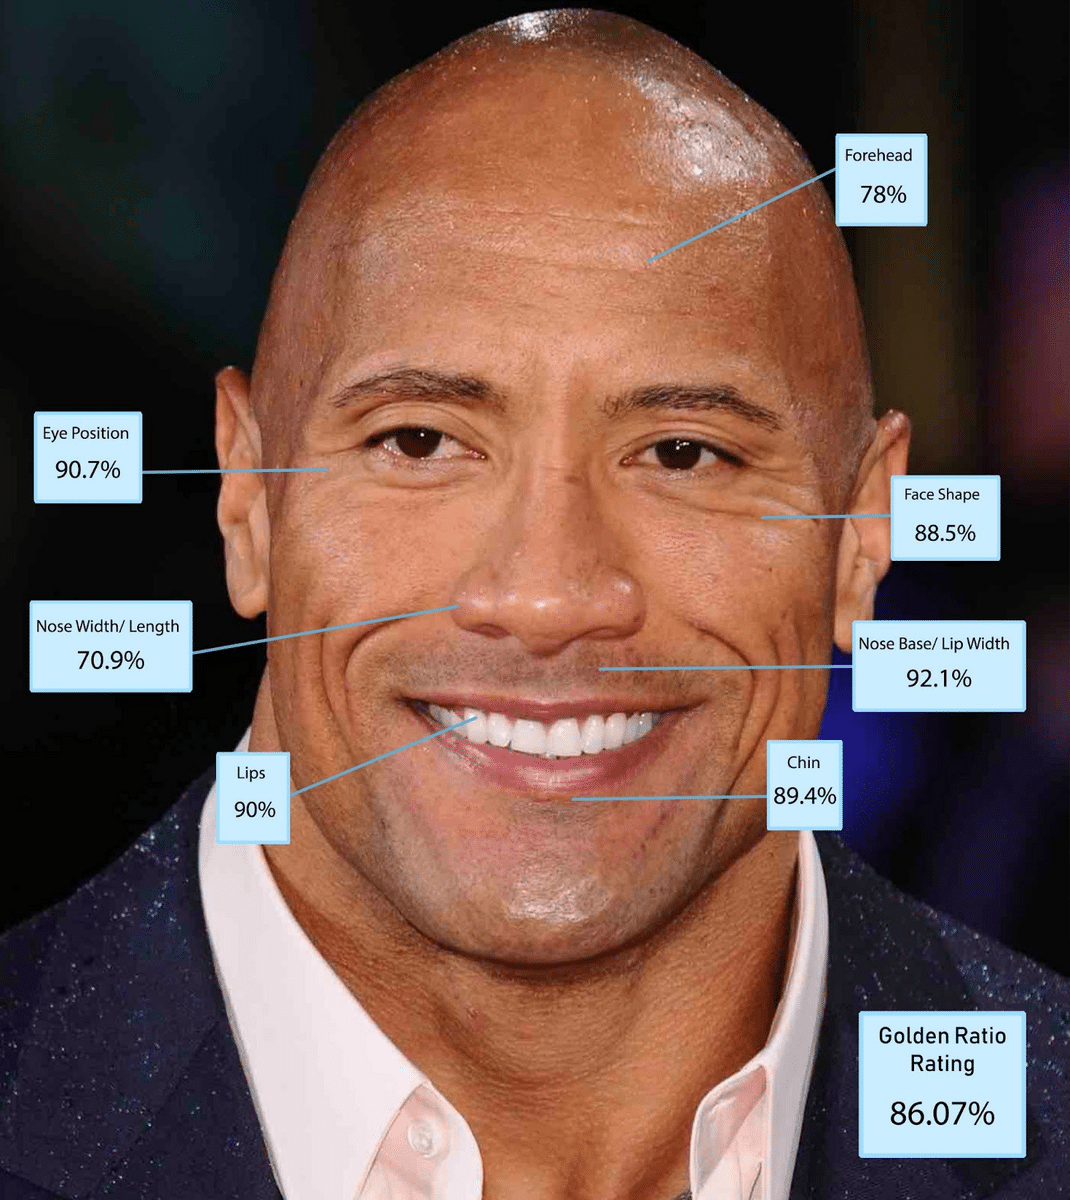 Dwayne Johnson, also known as The Rock, is an American actor, producer, and former professional wrestler. 